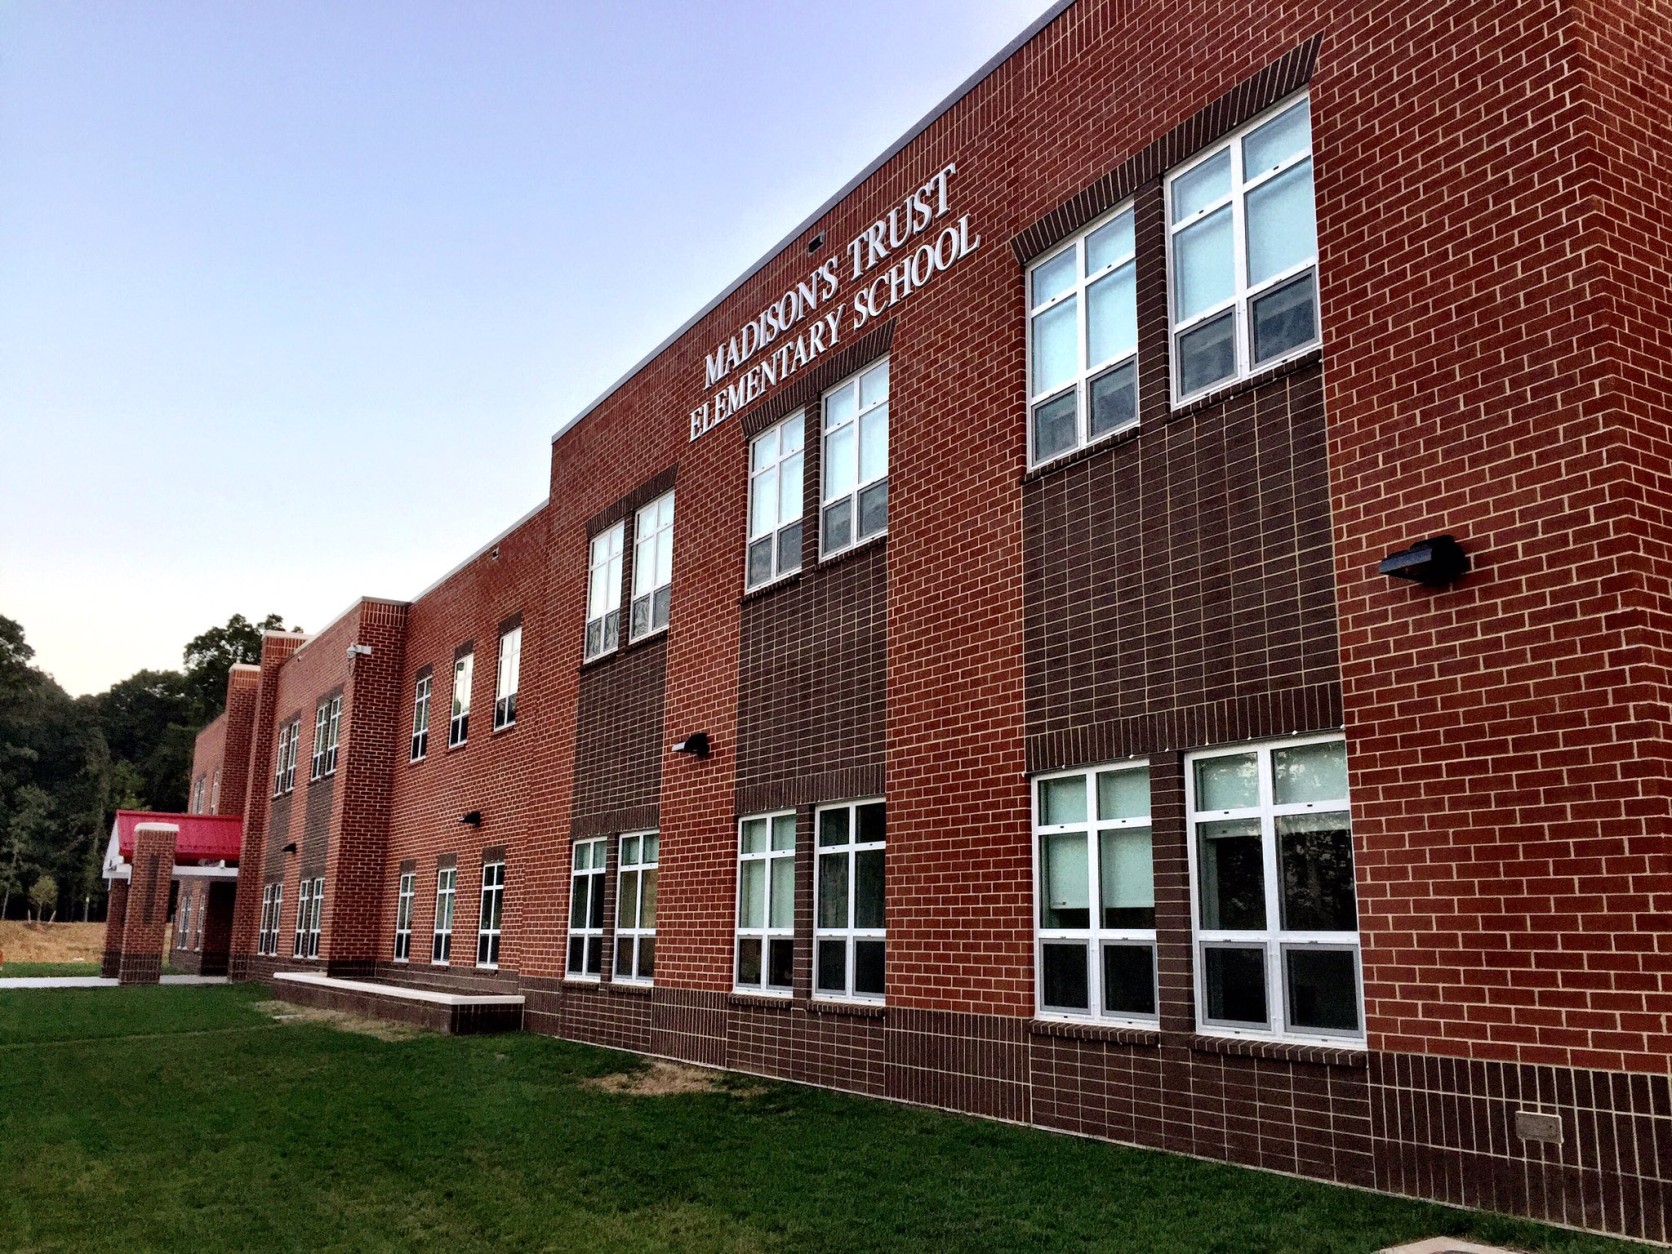 The new Madison's Trust Elementary School opened its doors Aug. 29, 2016. (WTOP/Neal Augenstein)